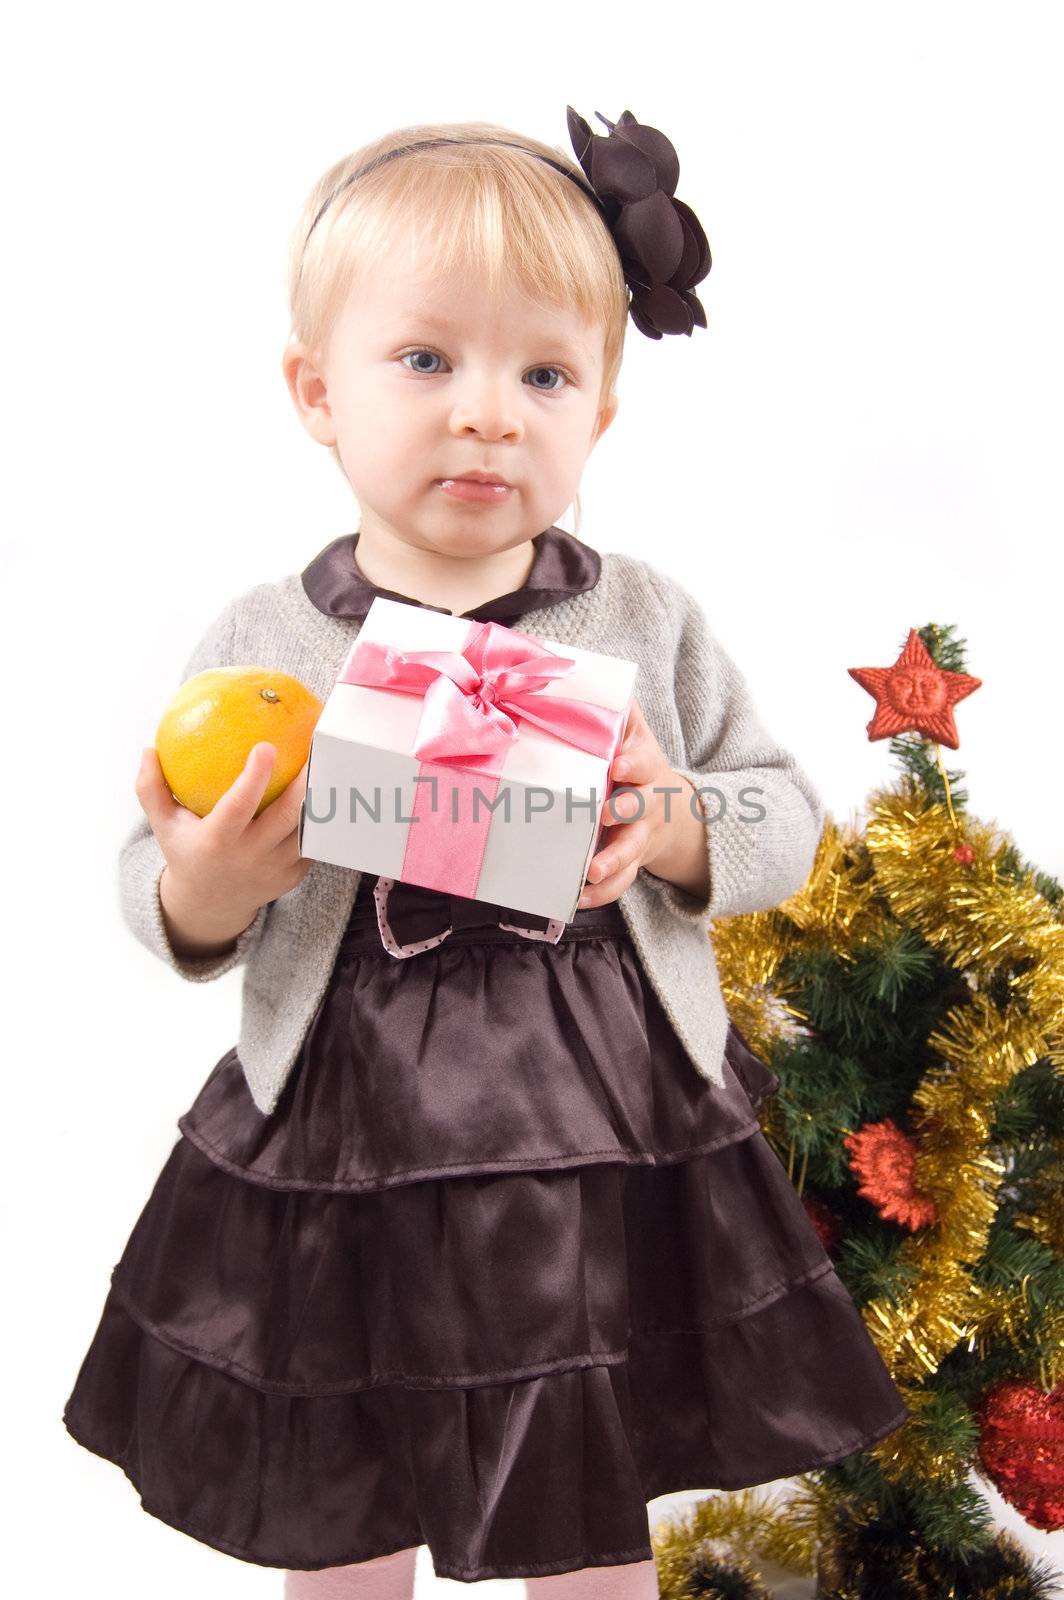 Cute little girl with Christmas tree and gifts over white